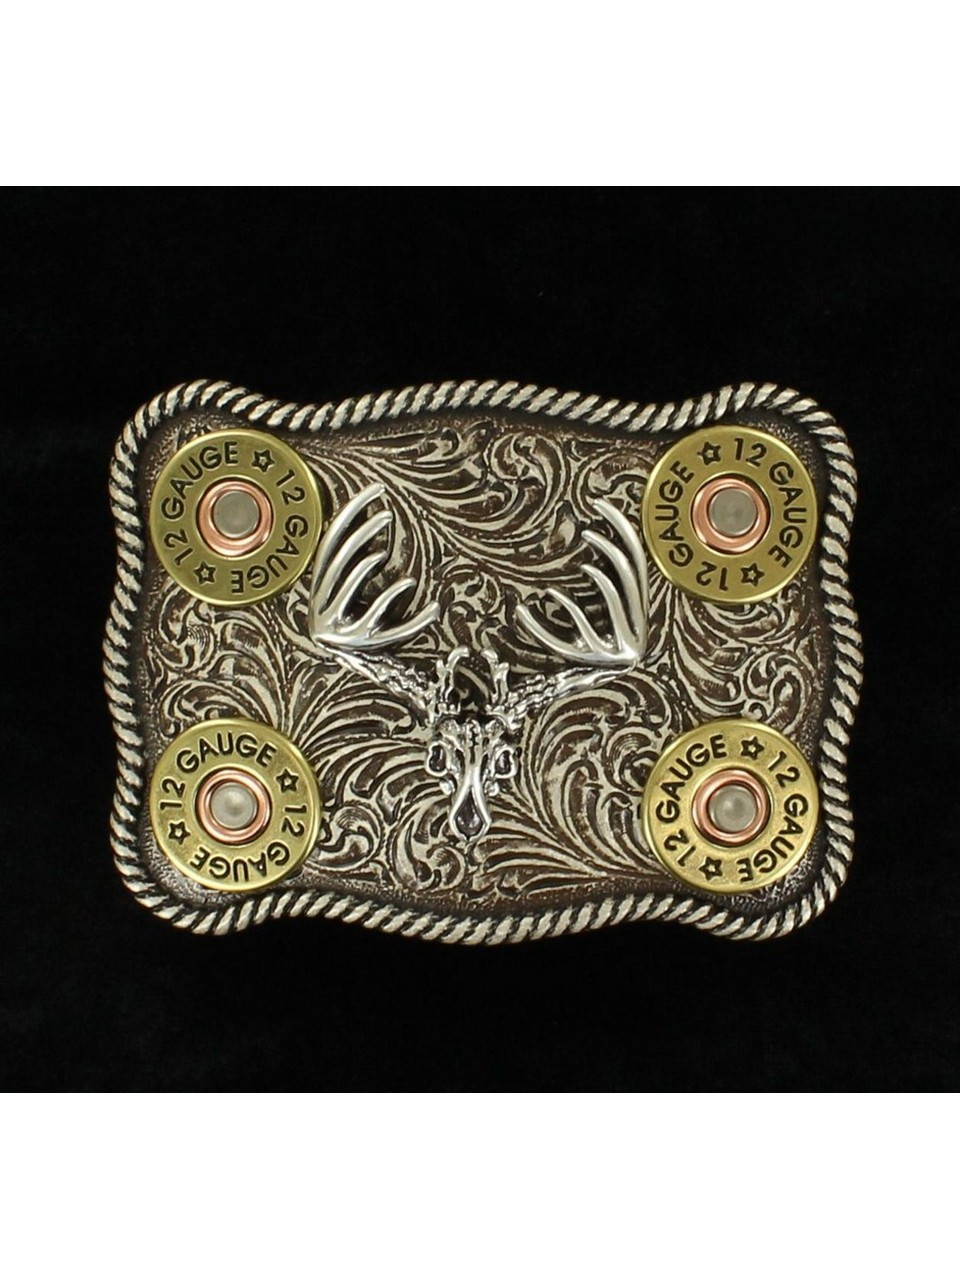 36 Wholesale Bull Riding Rodeo Belt Buckle - at